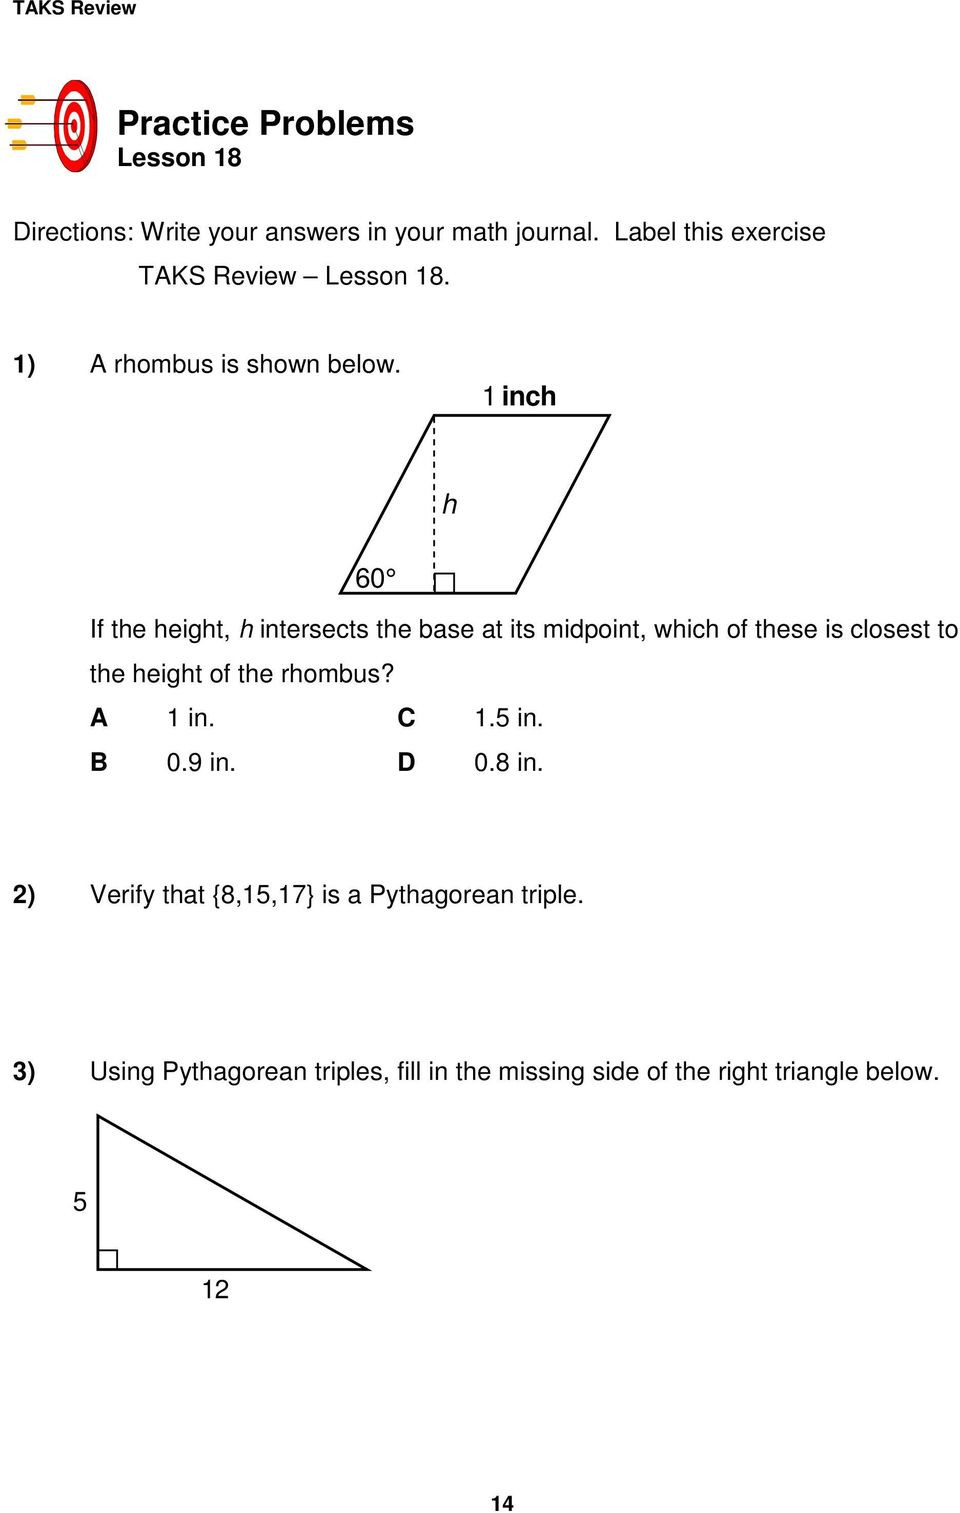 Special Right Triangles Practice Worksheet Lesson 18 Pythagorean Triples &amp; Special Right Triangles